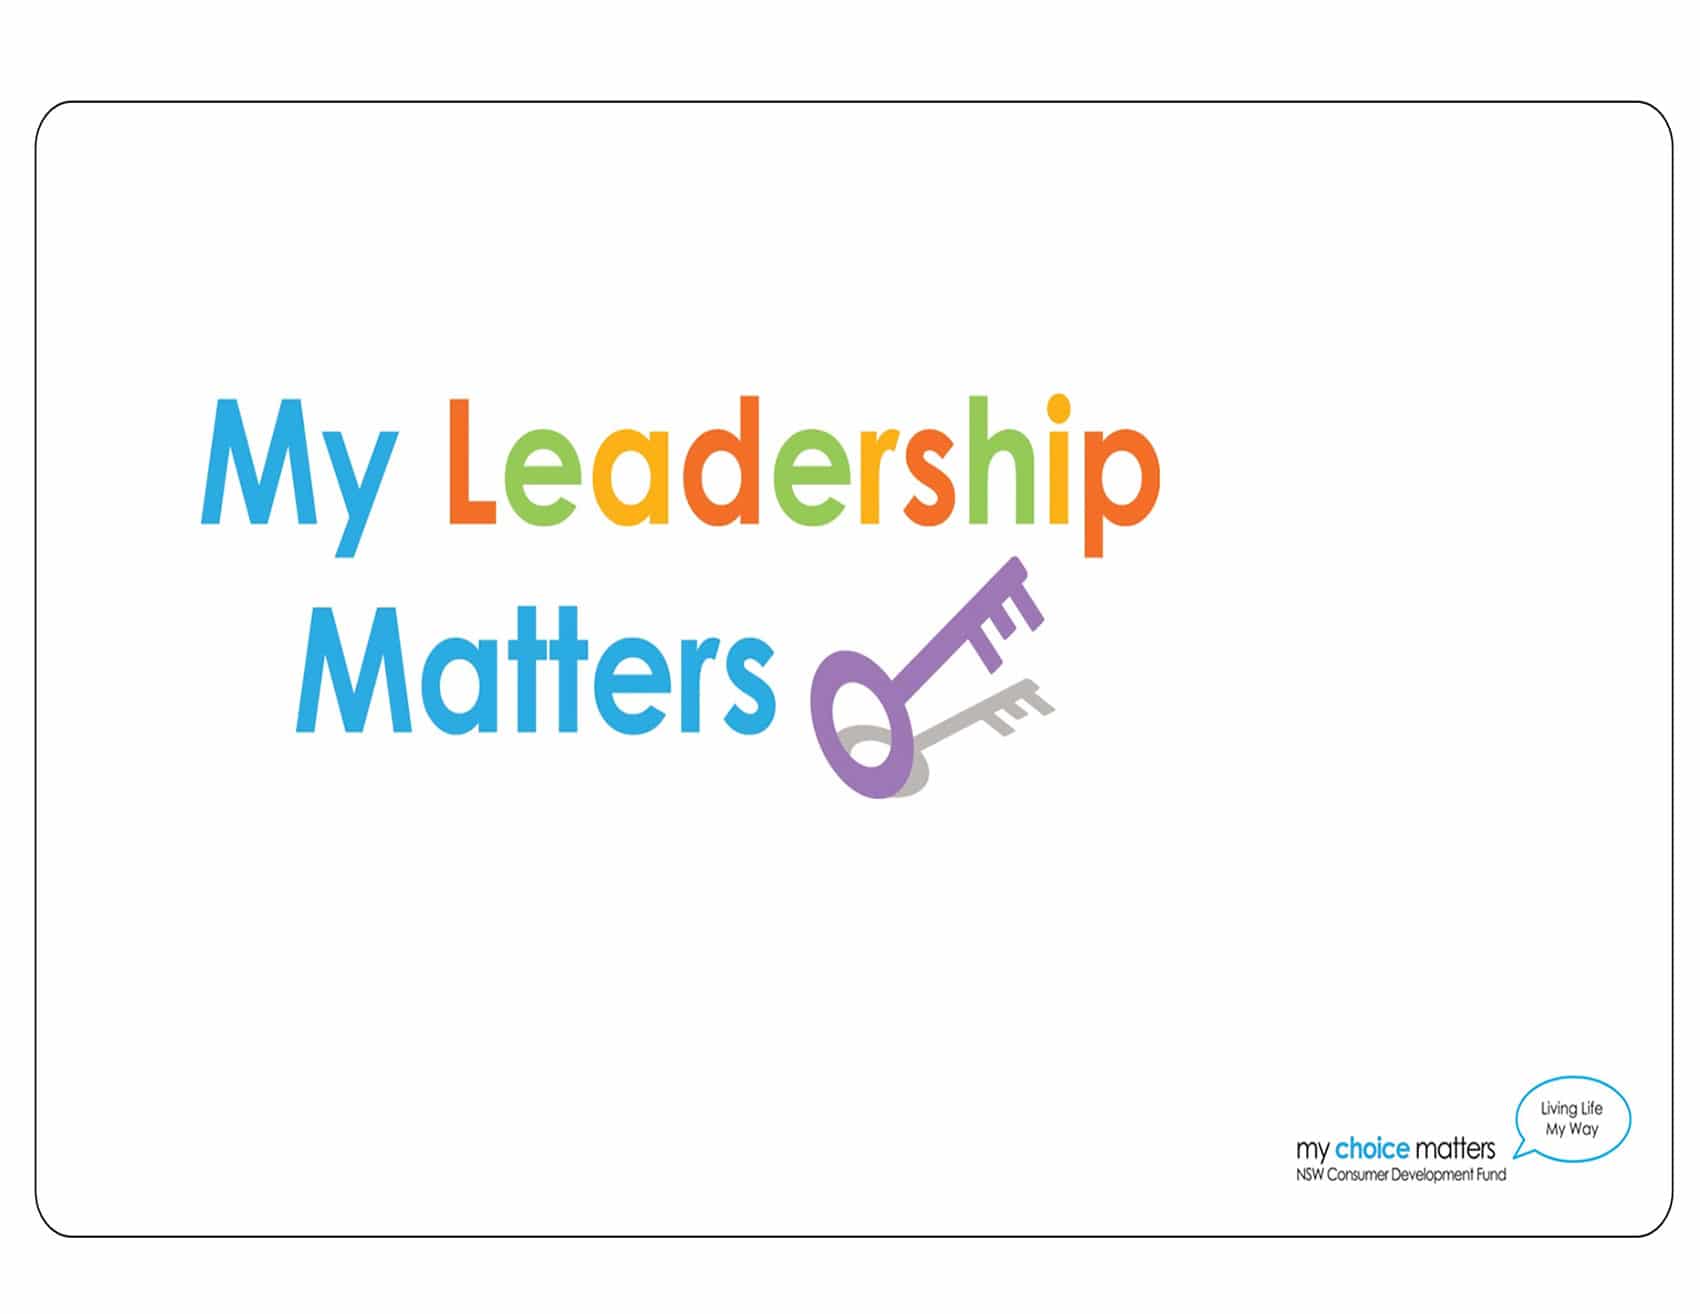 Image for the My Leadership Matters toolkit